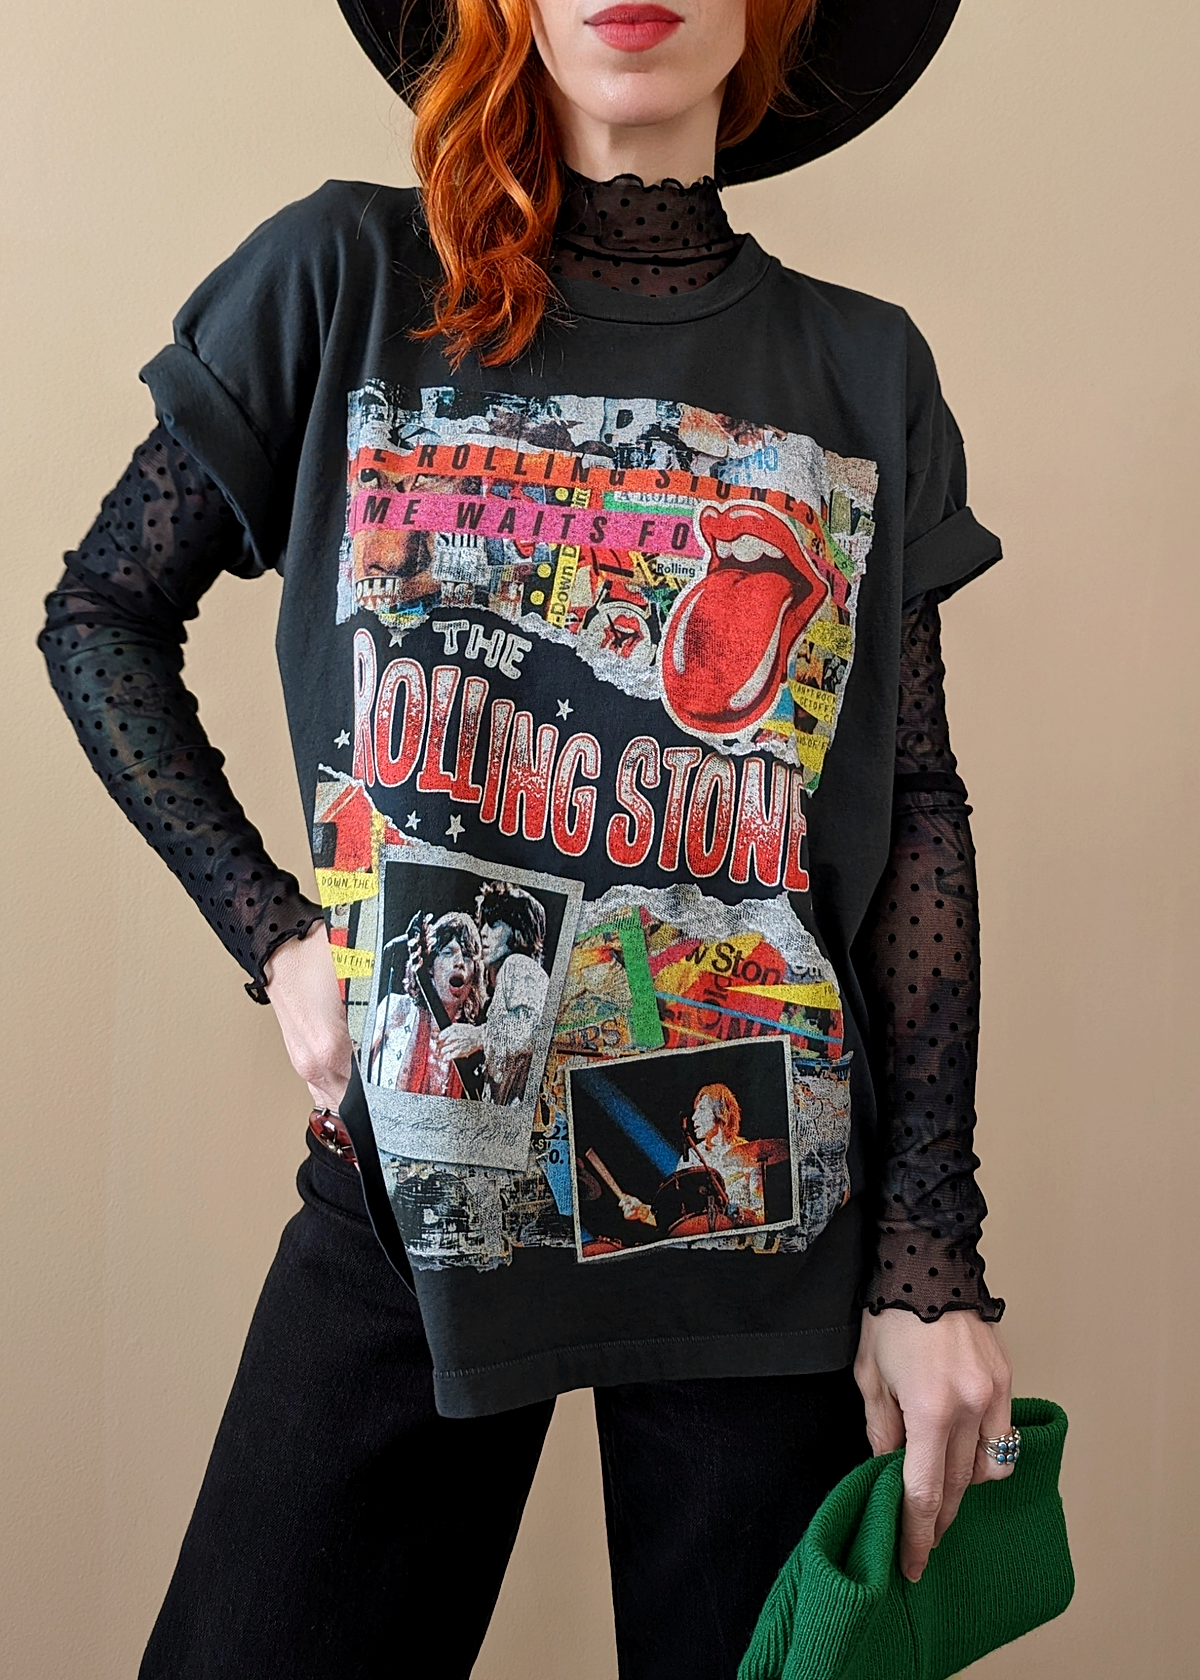 Daydreamer LA Rolling Stones Time Waits for No One Tongue, concert tickets, and photograph of the band with Mick Jagger, Charlie Watts, Keith Richards. Oversized Tee. Officially Licensed and made in California